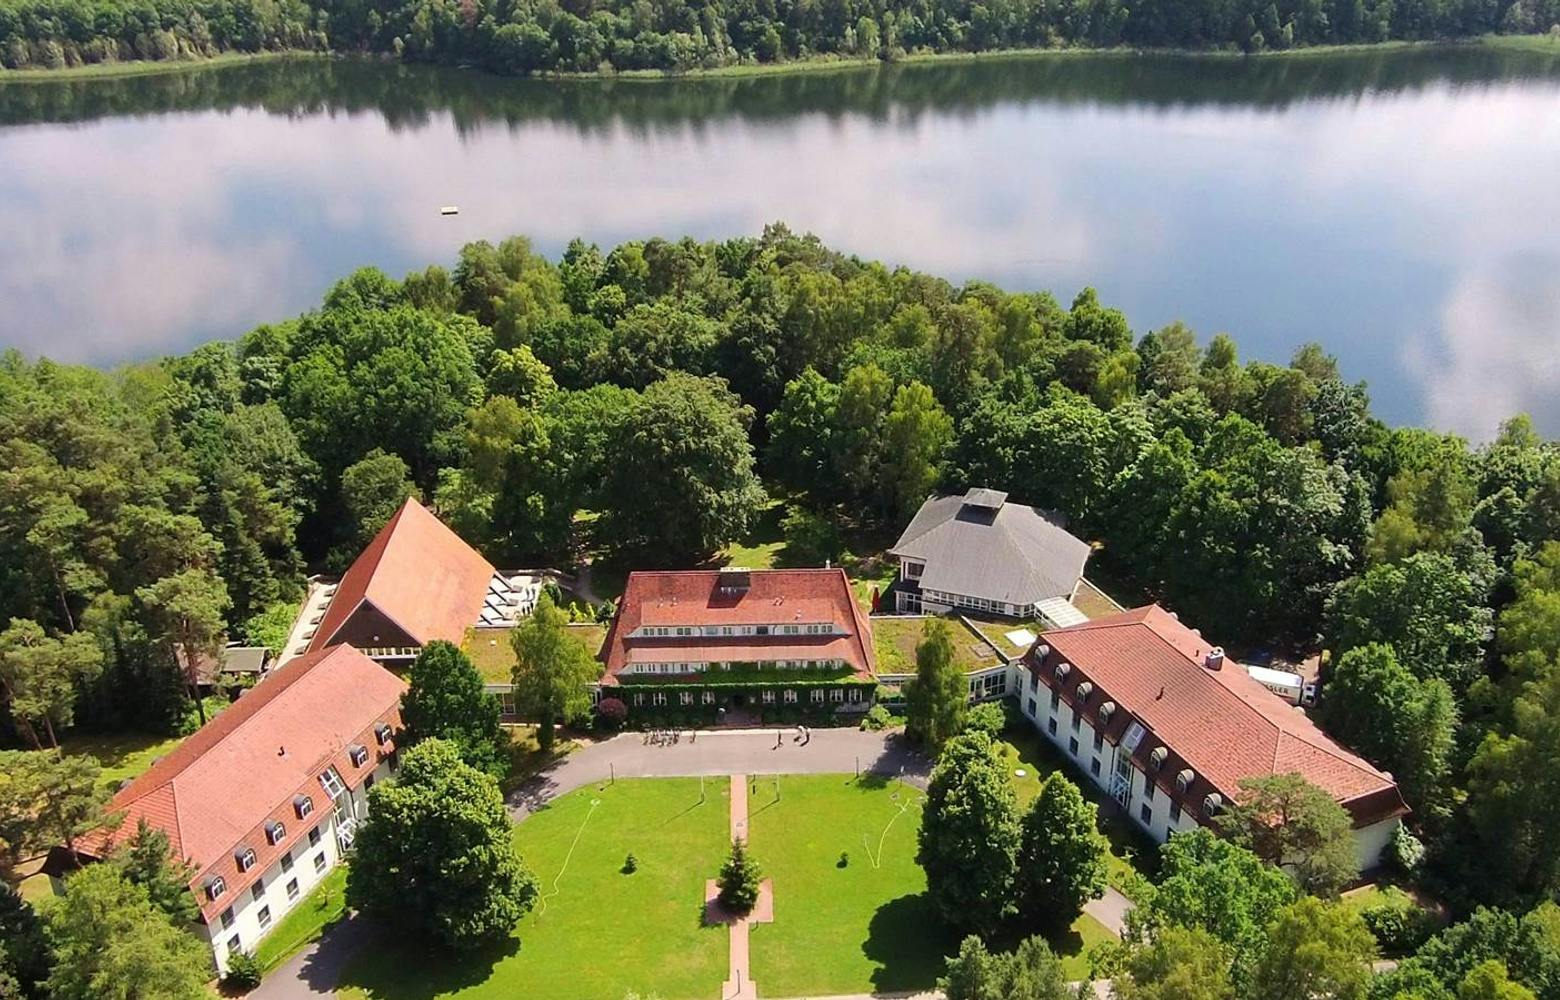 Historic lakeside hotel hidden in the forest